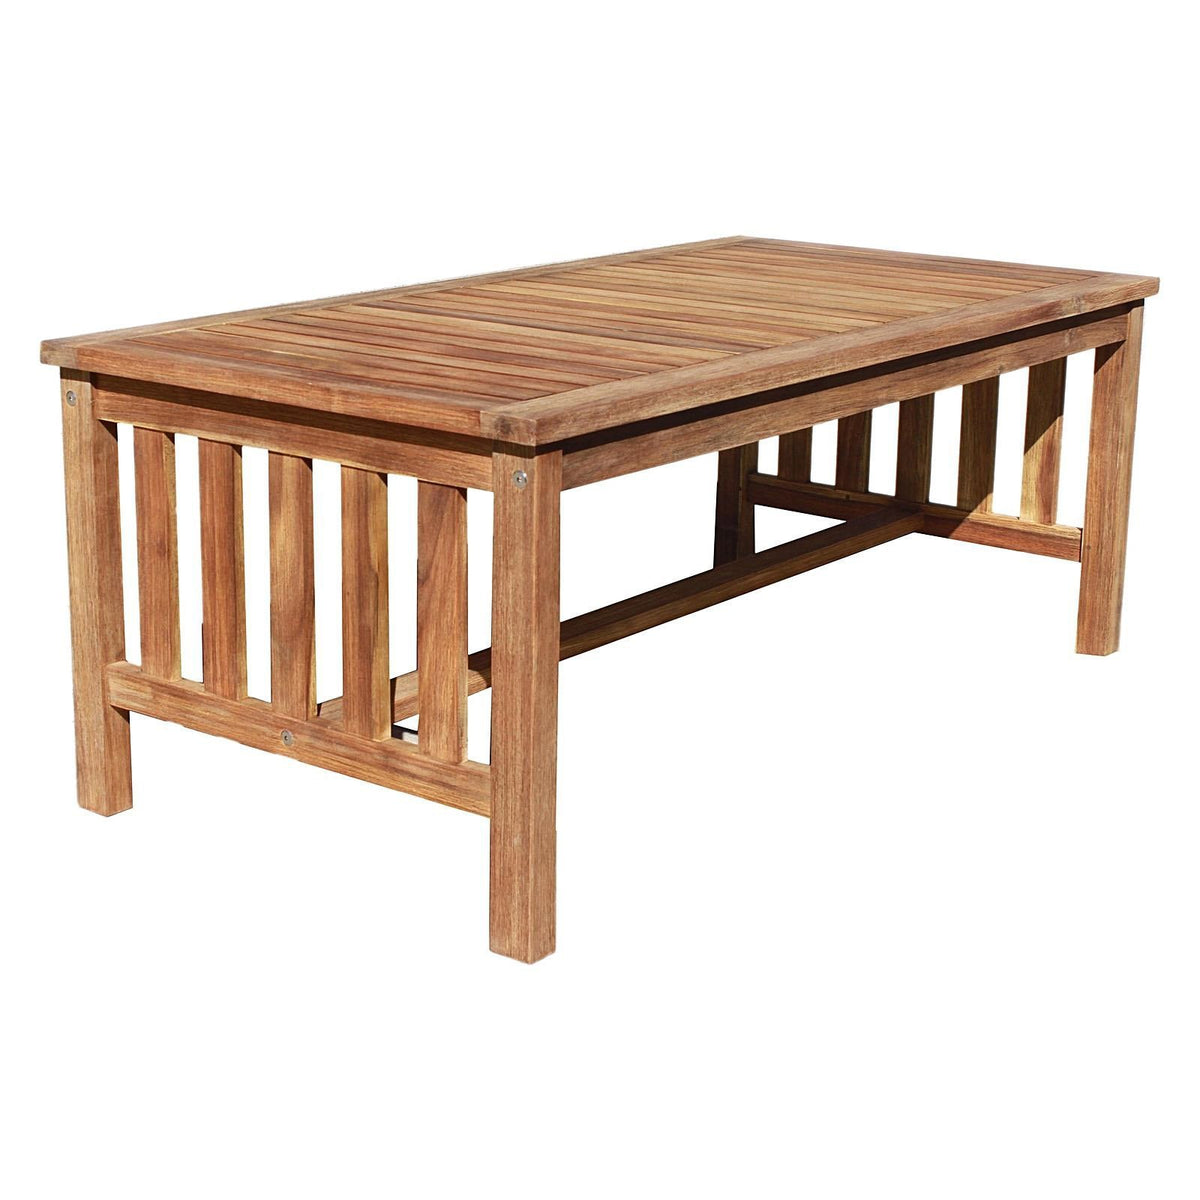 Classic Outdoor Coffee Table - Outdoor Living Essentials